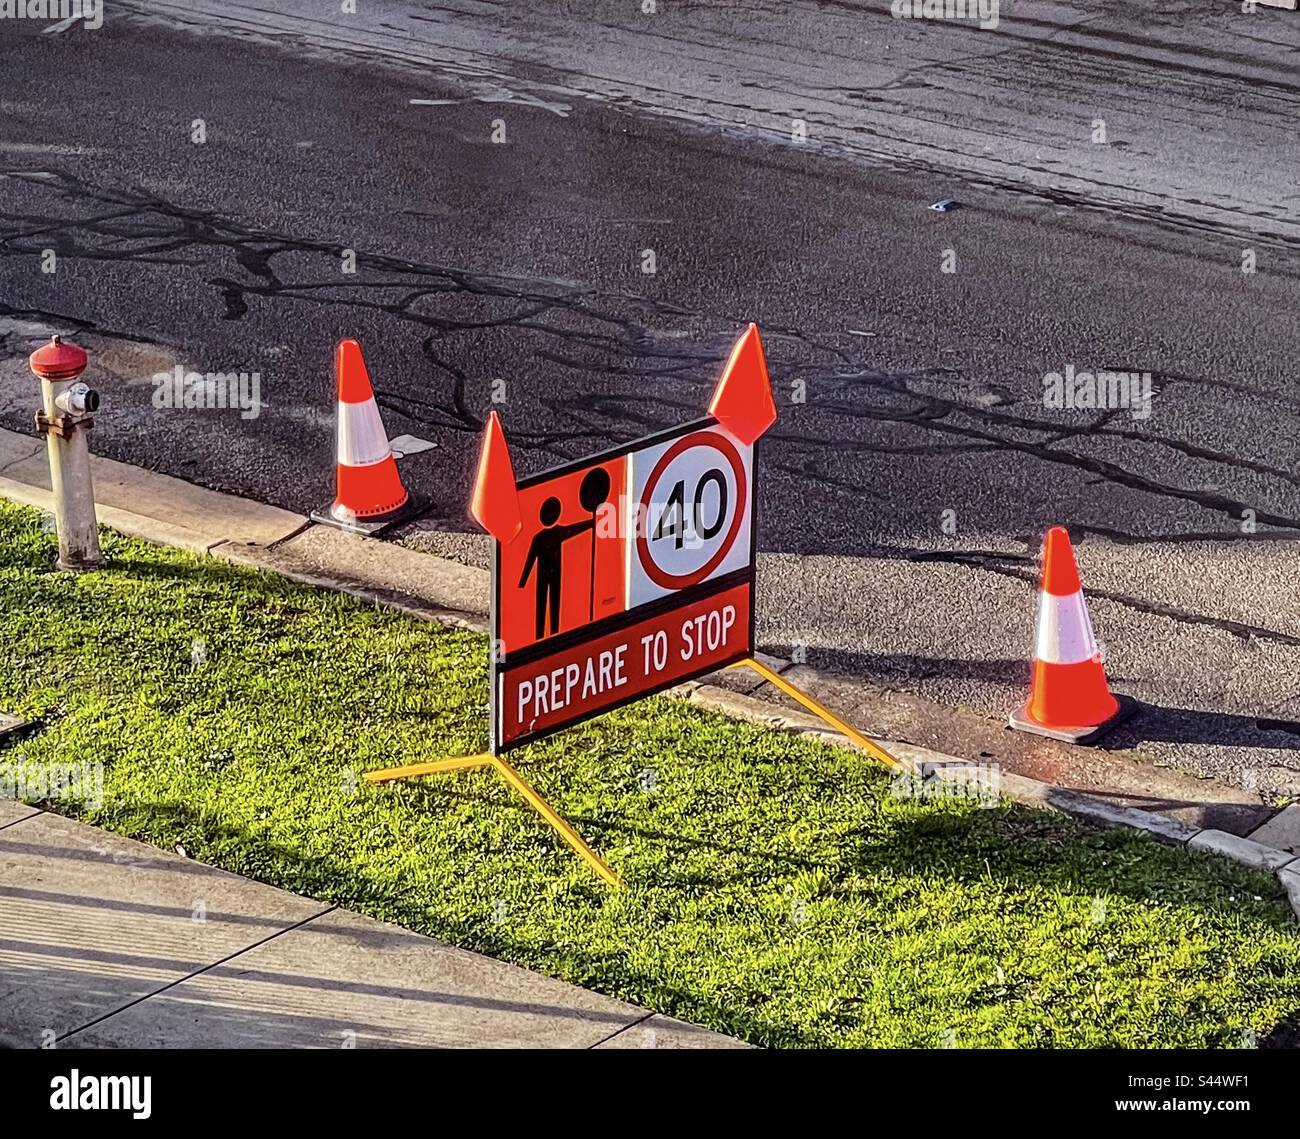 Traffic cones and warning sign on nature strip beside road indicating road works ahead and speed limit of 40 km/hr. Stock Photo